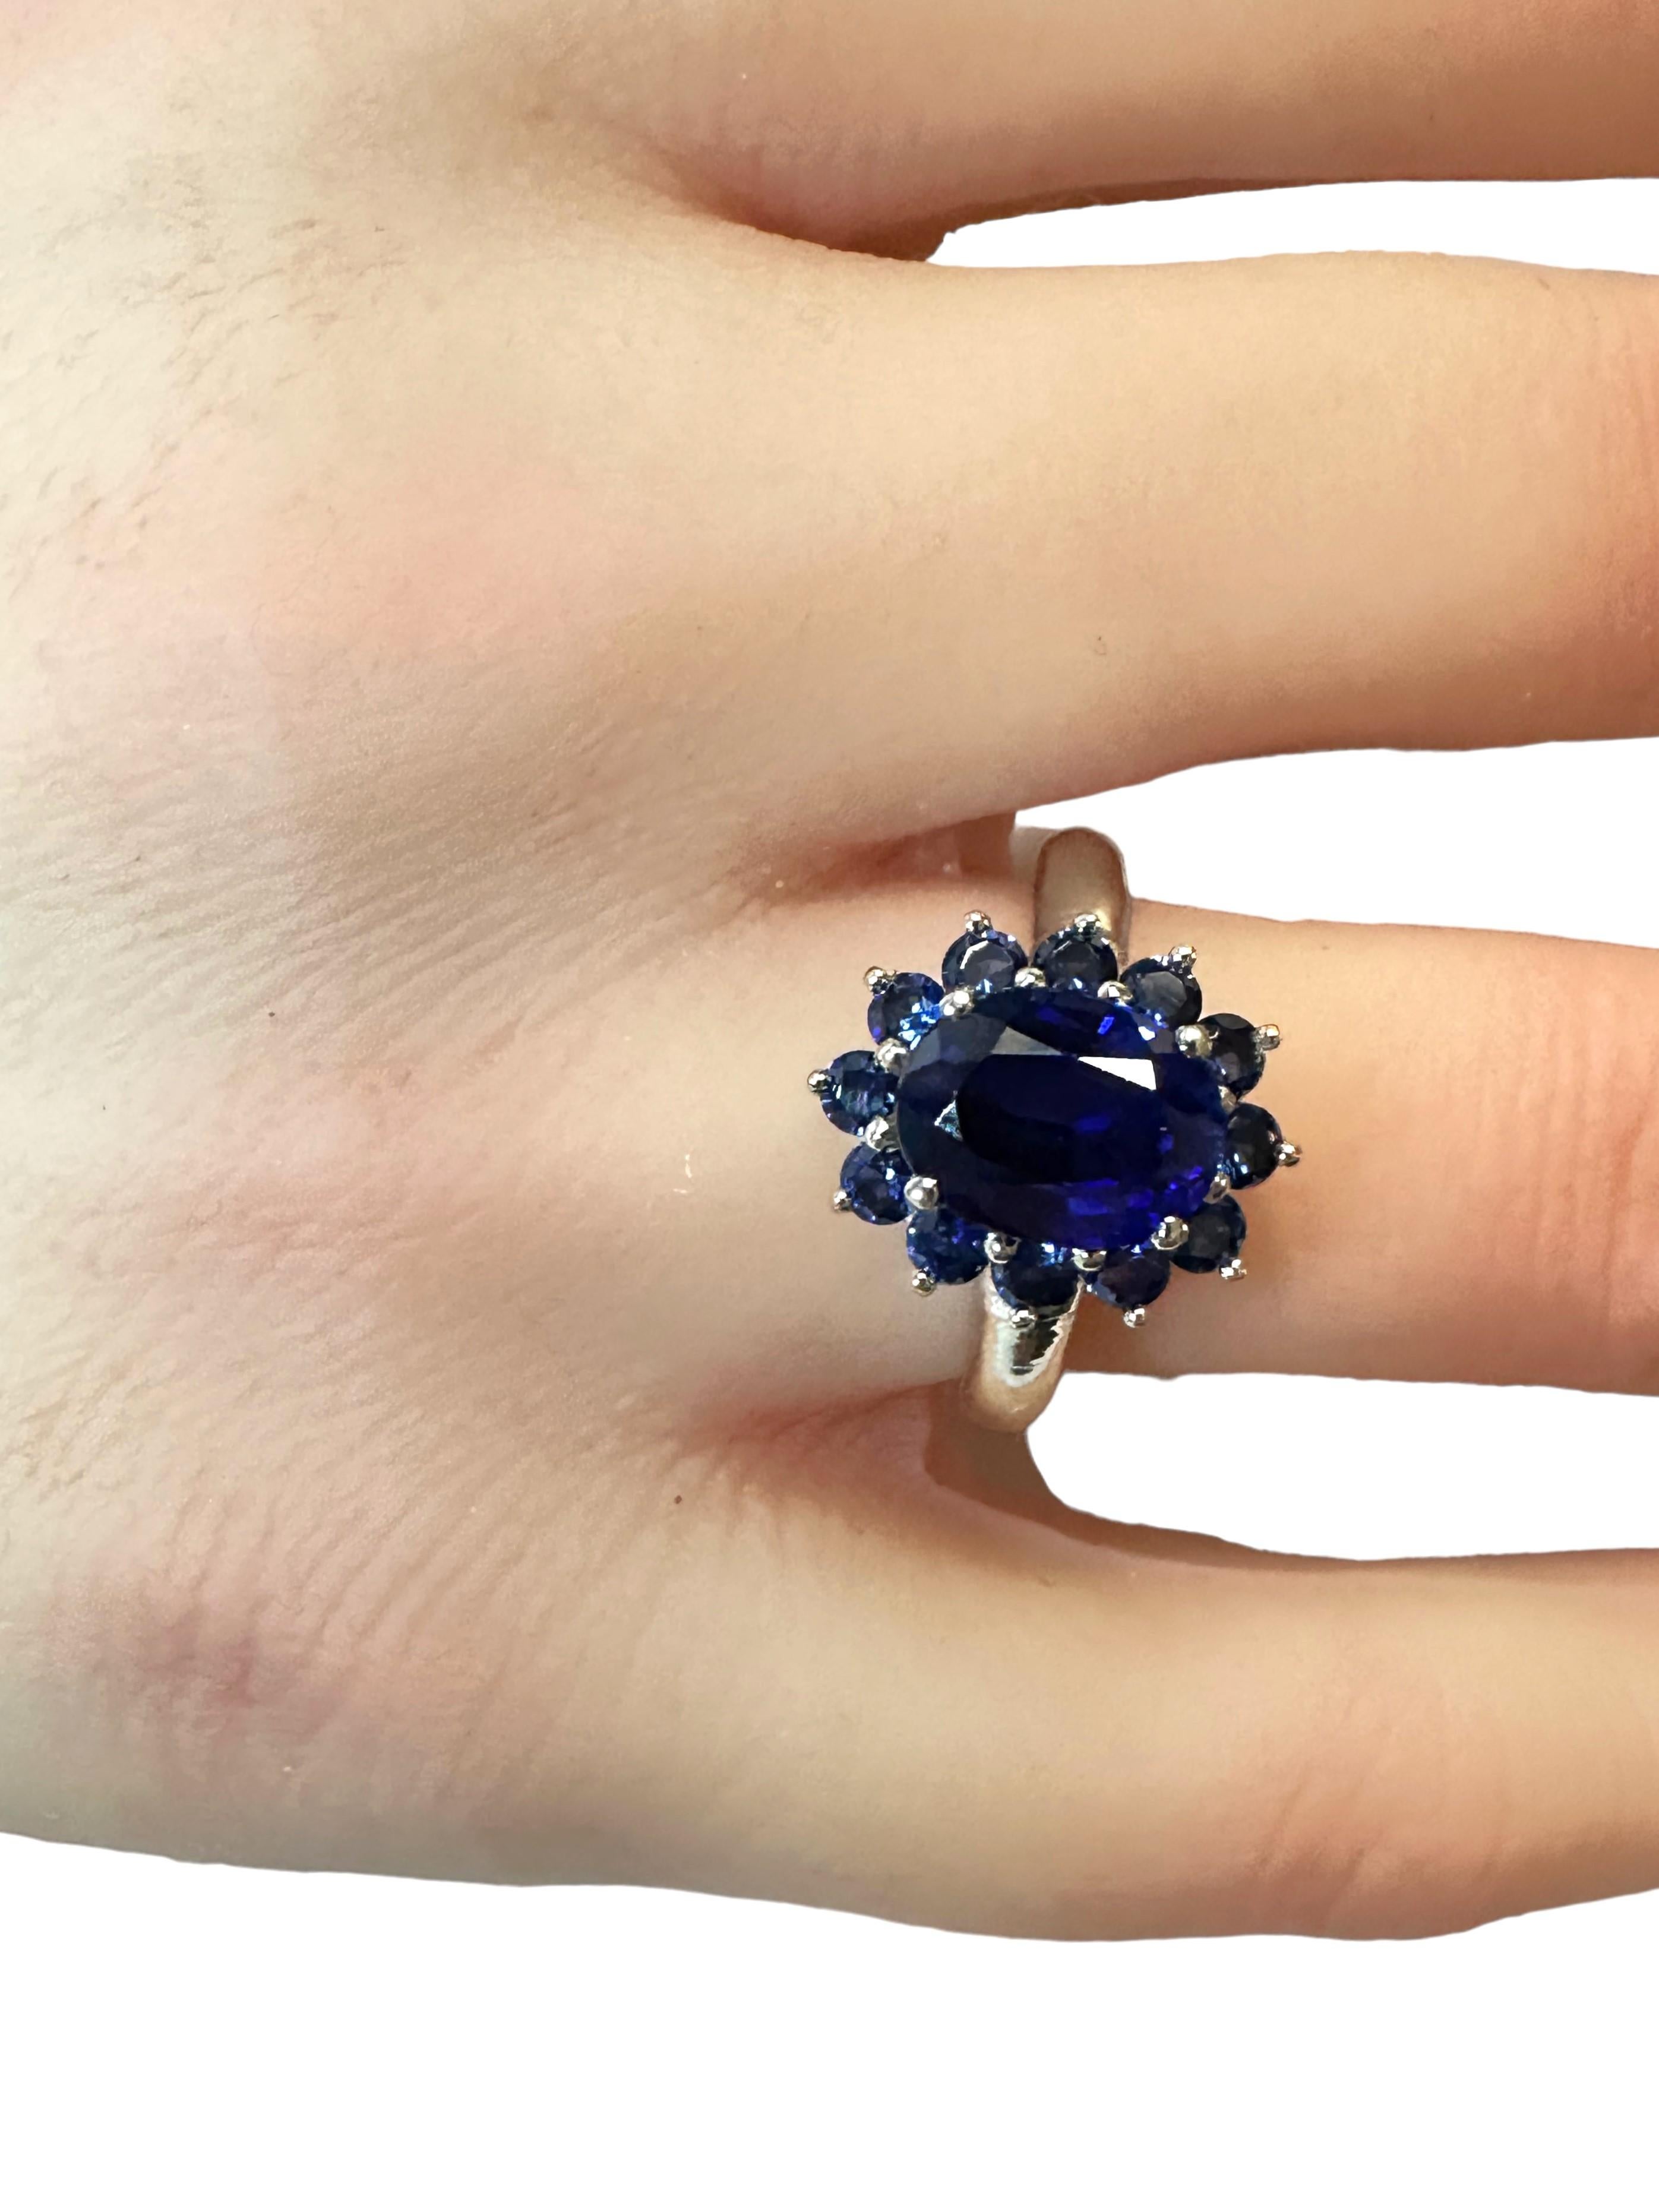 New African 3.20 Ct Deep Blue Sapphire Sterling Ring Size 6.25 For Sale 2